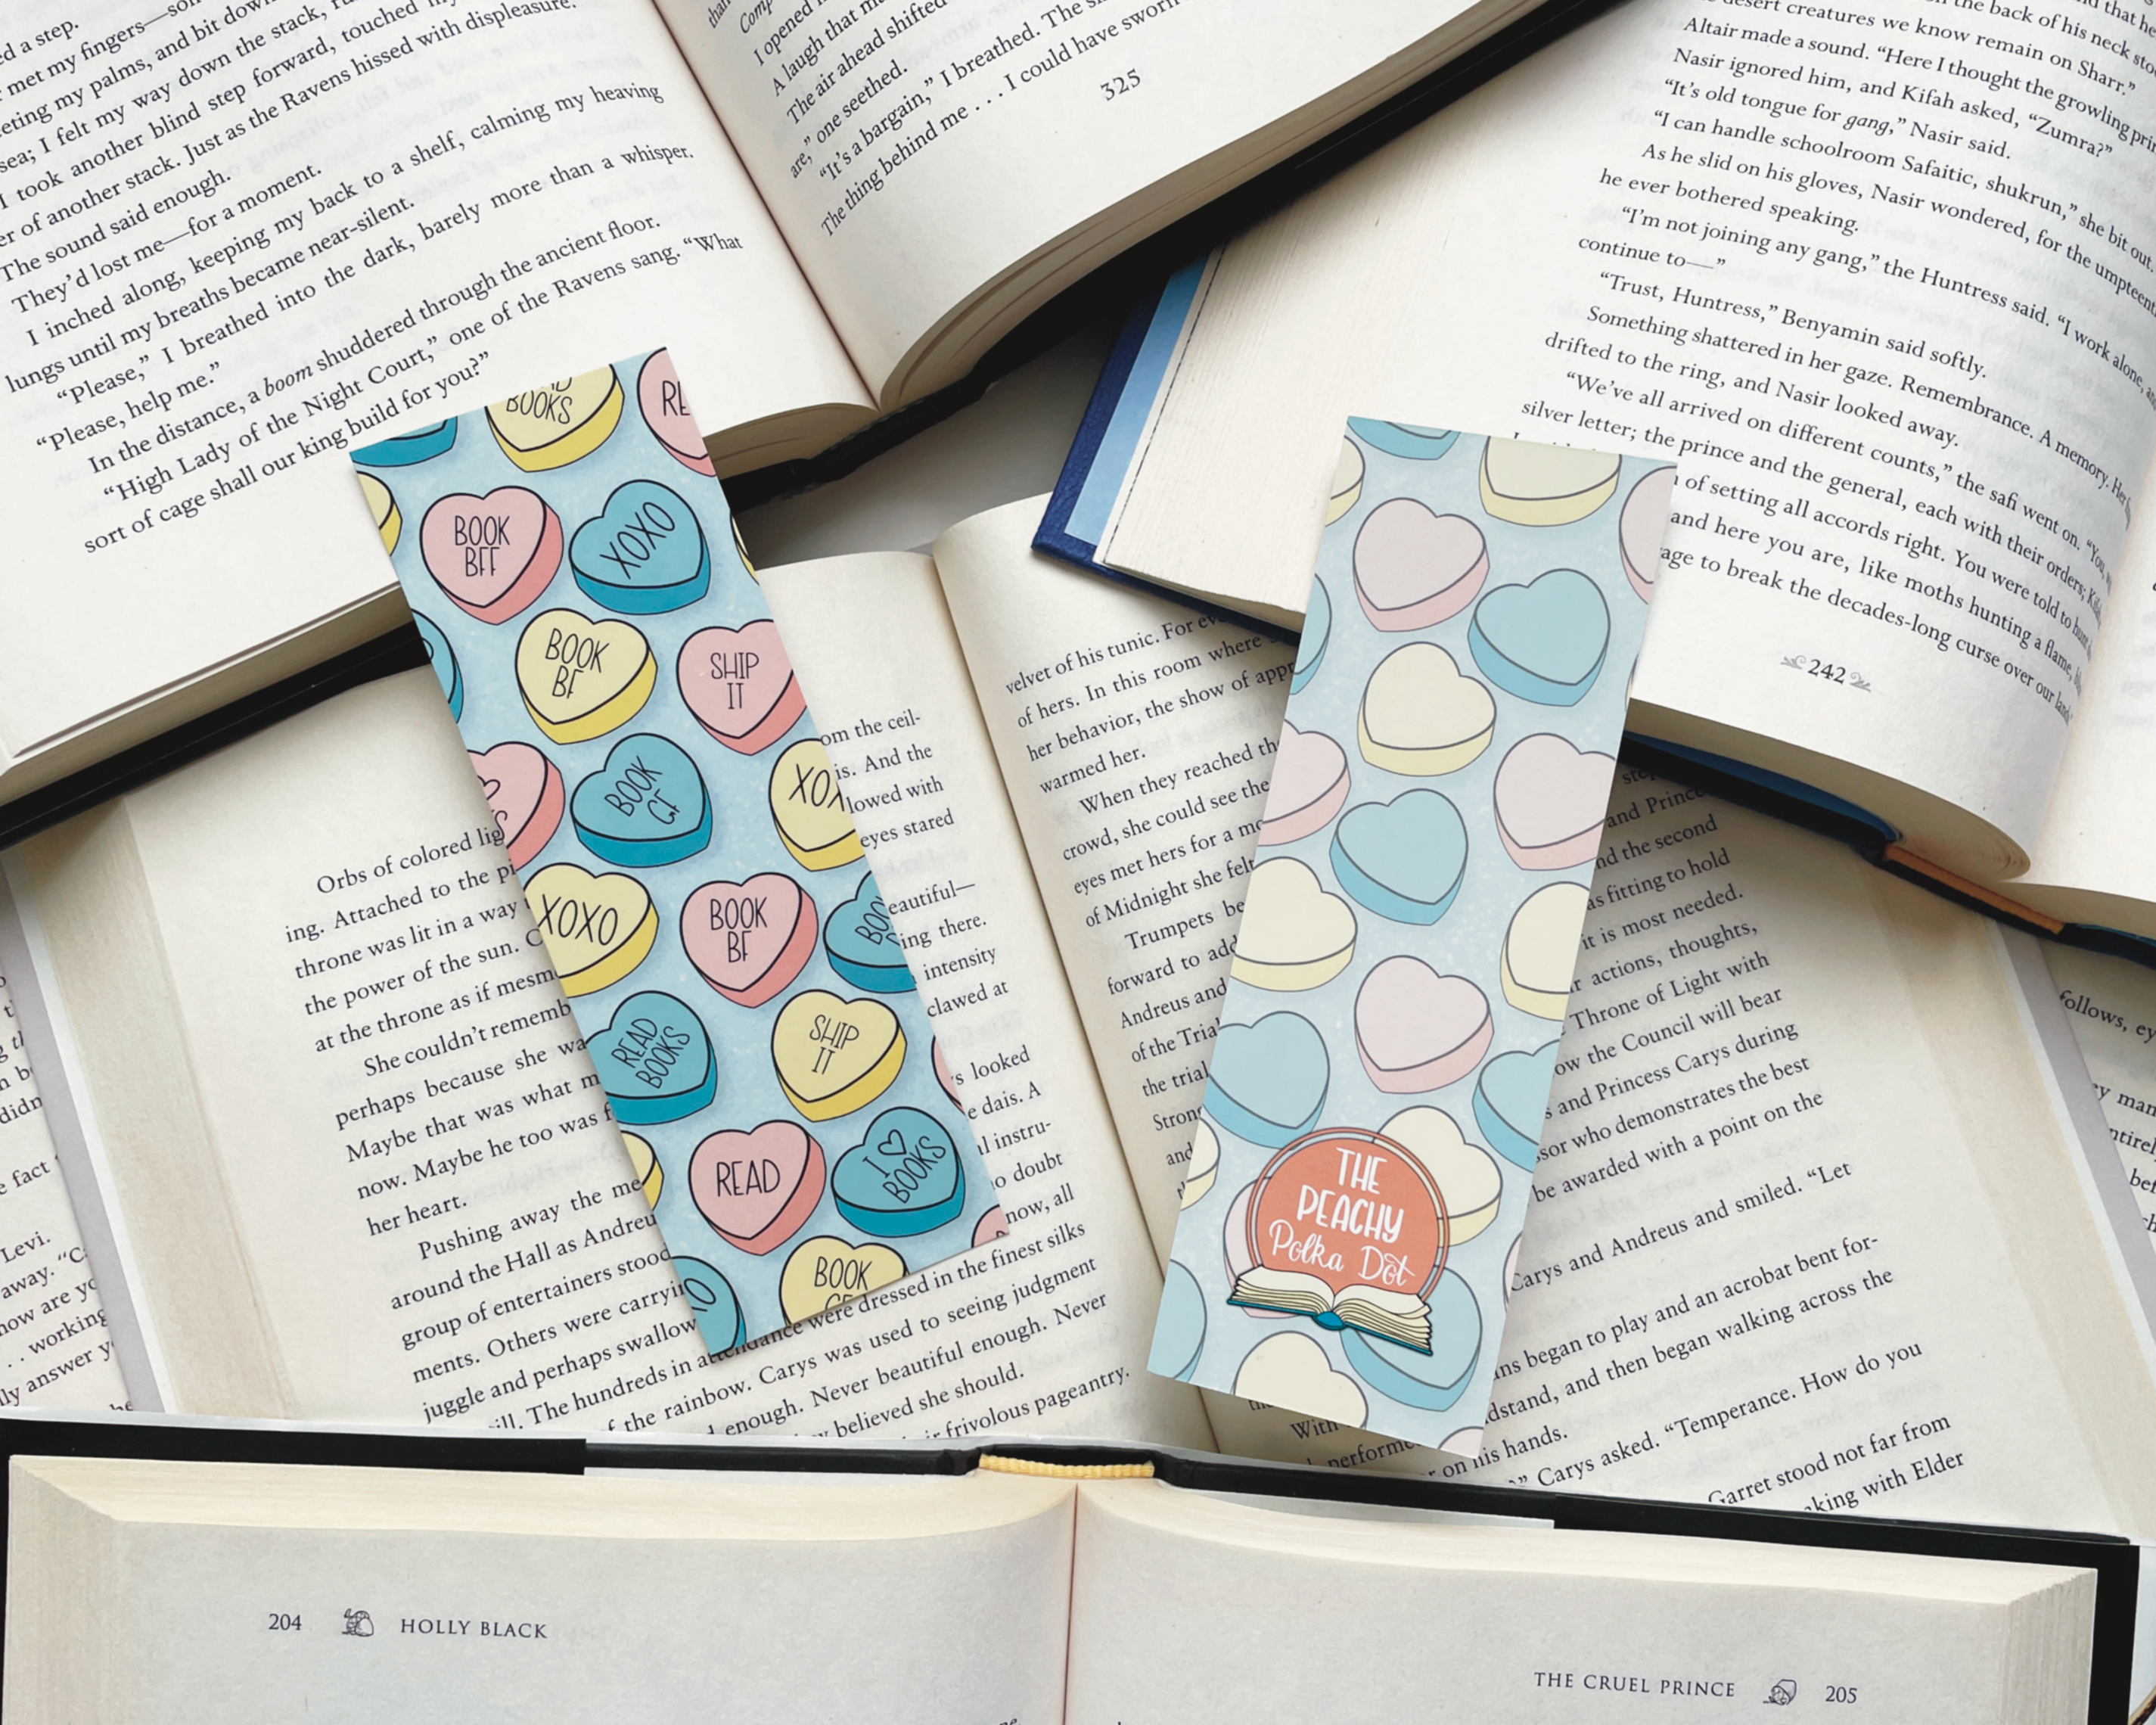 store　bookmark　Faire　for　Conversation　Wholesale　Hearts　Bookish　your